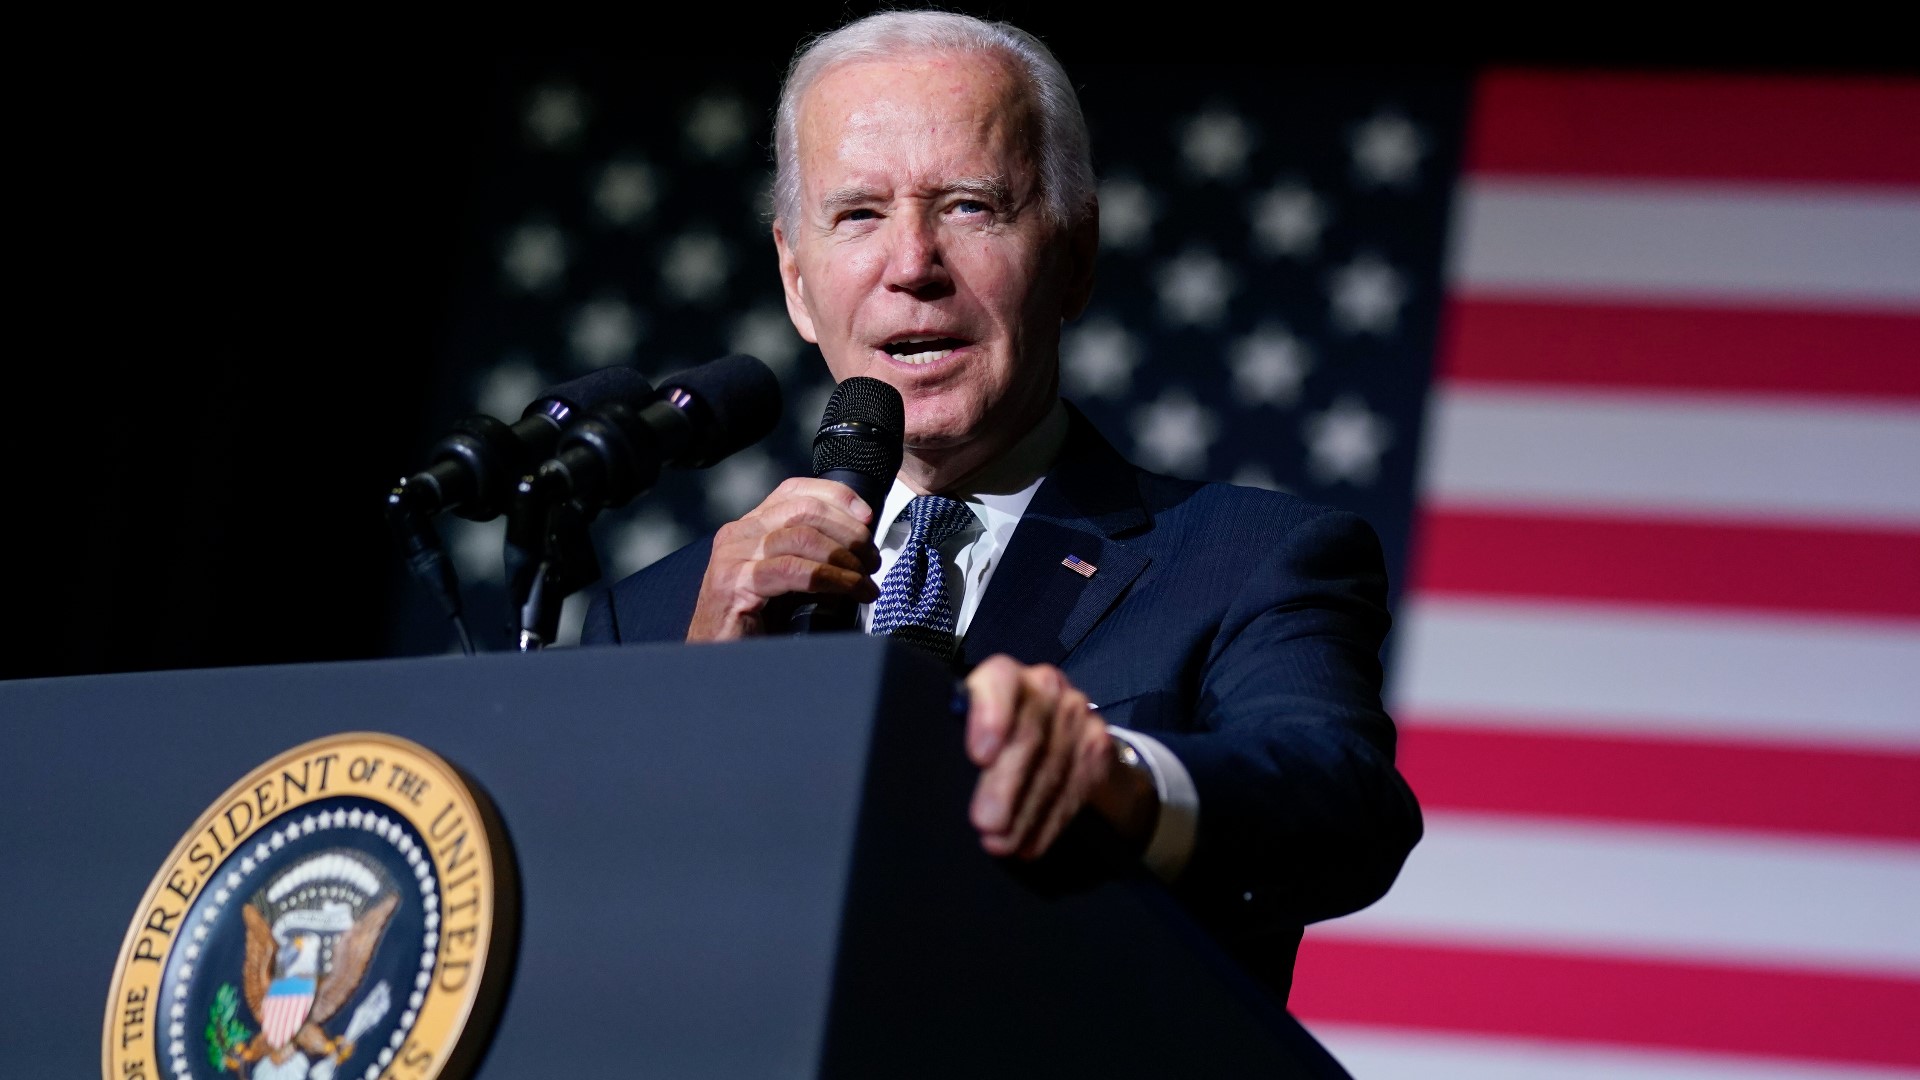 The court ruled Friday that Biden's plan to cancel thousands of dollars in student loan debt should be put on hold while legal challenges play out in court.